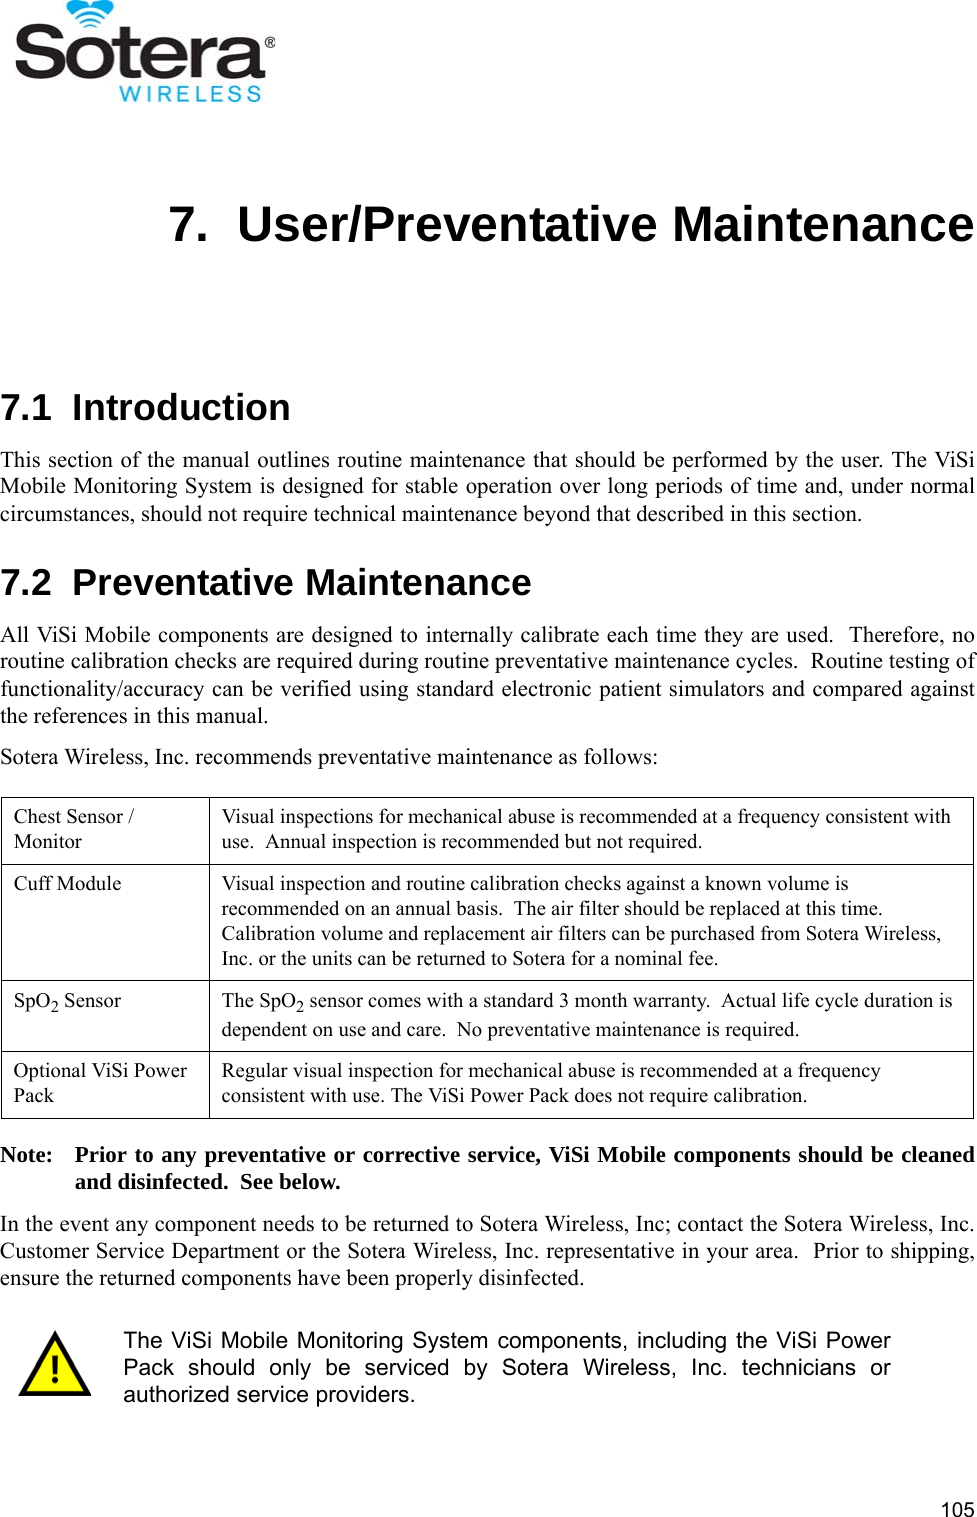 1057.  User/Preventative Maintenance7.1  IntroductionThis section of the manual outlines routine maintenance that should be performed by the user. The ViSiMobile Monitoring System is designed for stable operation over long periods of time and, under normalcircumstances, should not require technical maintenance beyond that described in this section.7.2  Preventative MaintenanceAll ViSi Mobile components are designed to internally calibrate each time they are used.  Therefore, noroutine calibration checks are required during routine preventative maintenance cycles.  Routine testing offunctionality/accuracy can be verified using standard electronic patient simulators and compared againstthe references in this manual.Sotera Wireless, Inc. recommends preventative maintenance as follows:Note: Prior to any preventative or corrective service, ViSi Mobile components should be cleanedand disinfected.  See below.In the event any component needs to be returned to Sotera Wireless, Inc; contact the Sotera Wireless, Inc.Customer Service Department or the Sotera Wireless, Inc. representative in your area.  Prior to shipping,ensure the returned components have been properly disinfected.Chest Sensor / MonitorVisual inspections for mechanical abuse is recommended at a frequency consistent with  use.  Annual inspection is recommended but not required.Cuff Module Visual inspection and routine calibration checks against a known volume is recommended on an annual basis.  The air filter should be replaced at this time.  Calibration volume and replacement air filters can be purchased from Sotera Wireless, Inc. or the units can be returned to Sotera for a nominal fee.SpO2 Sensor The SpO2 sensor comes with a standard 3 month warranty.  Actual life cycle duration is dependent on use and care.  No preventative maintenance is required.Optional ViSi Power PackRegular visual inspection for mechanical abuse is recommended at a frequency consistent with use. The ViSi Power Pack does not require calibration.The ViSi Mobile Monitoring System components, including the ViSi PowerPack should only be serviced by Sotera Wireless, Inc. technicians orauthorized service providers.